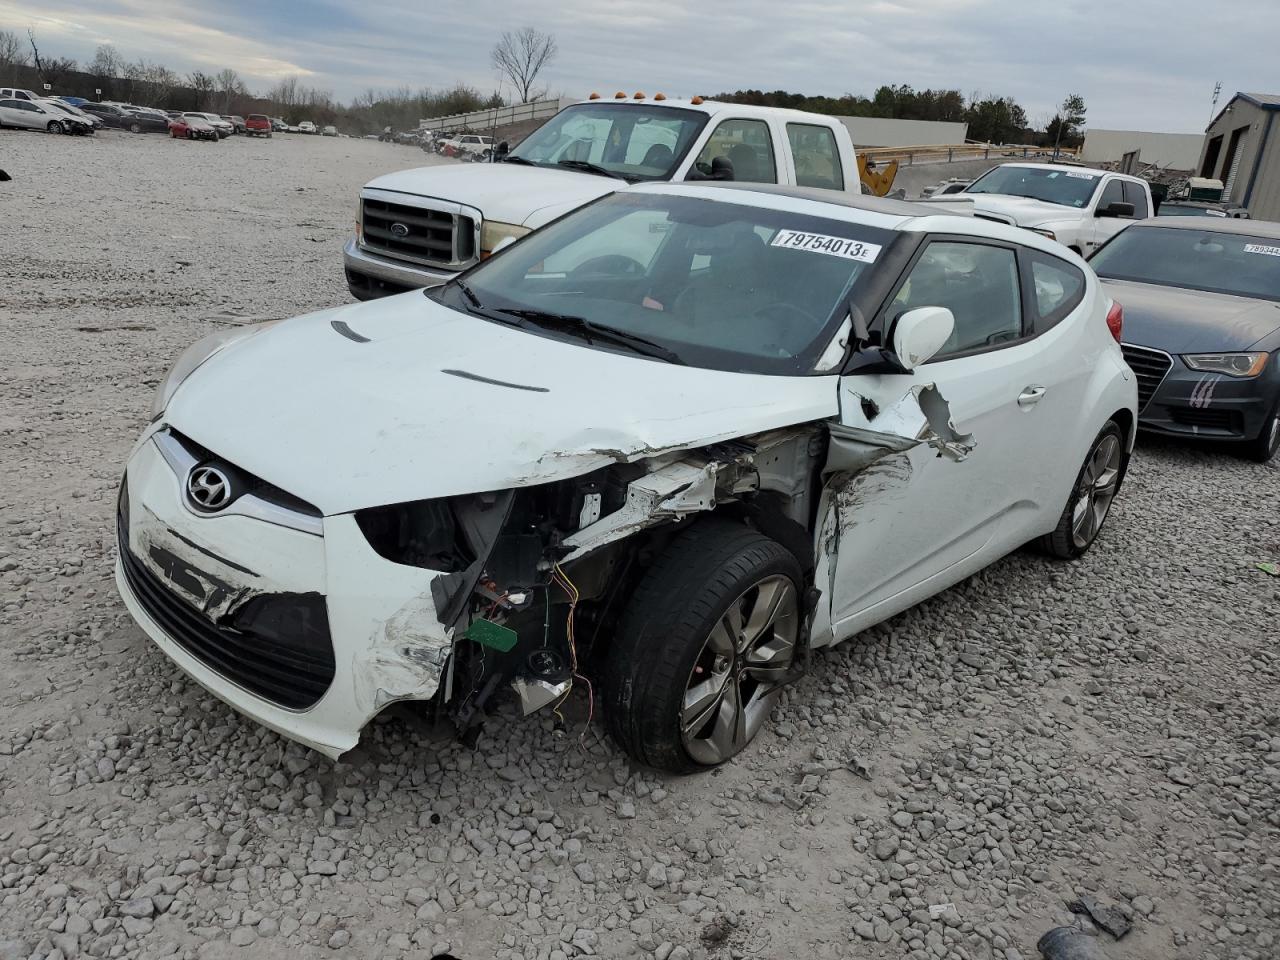 KMHTC6AD4CU****** Salvage and Wrecked 2012 Hyundai Veloster in AL - Hueytown